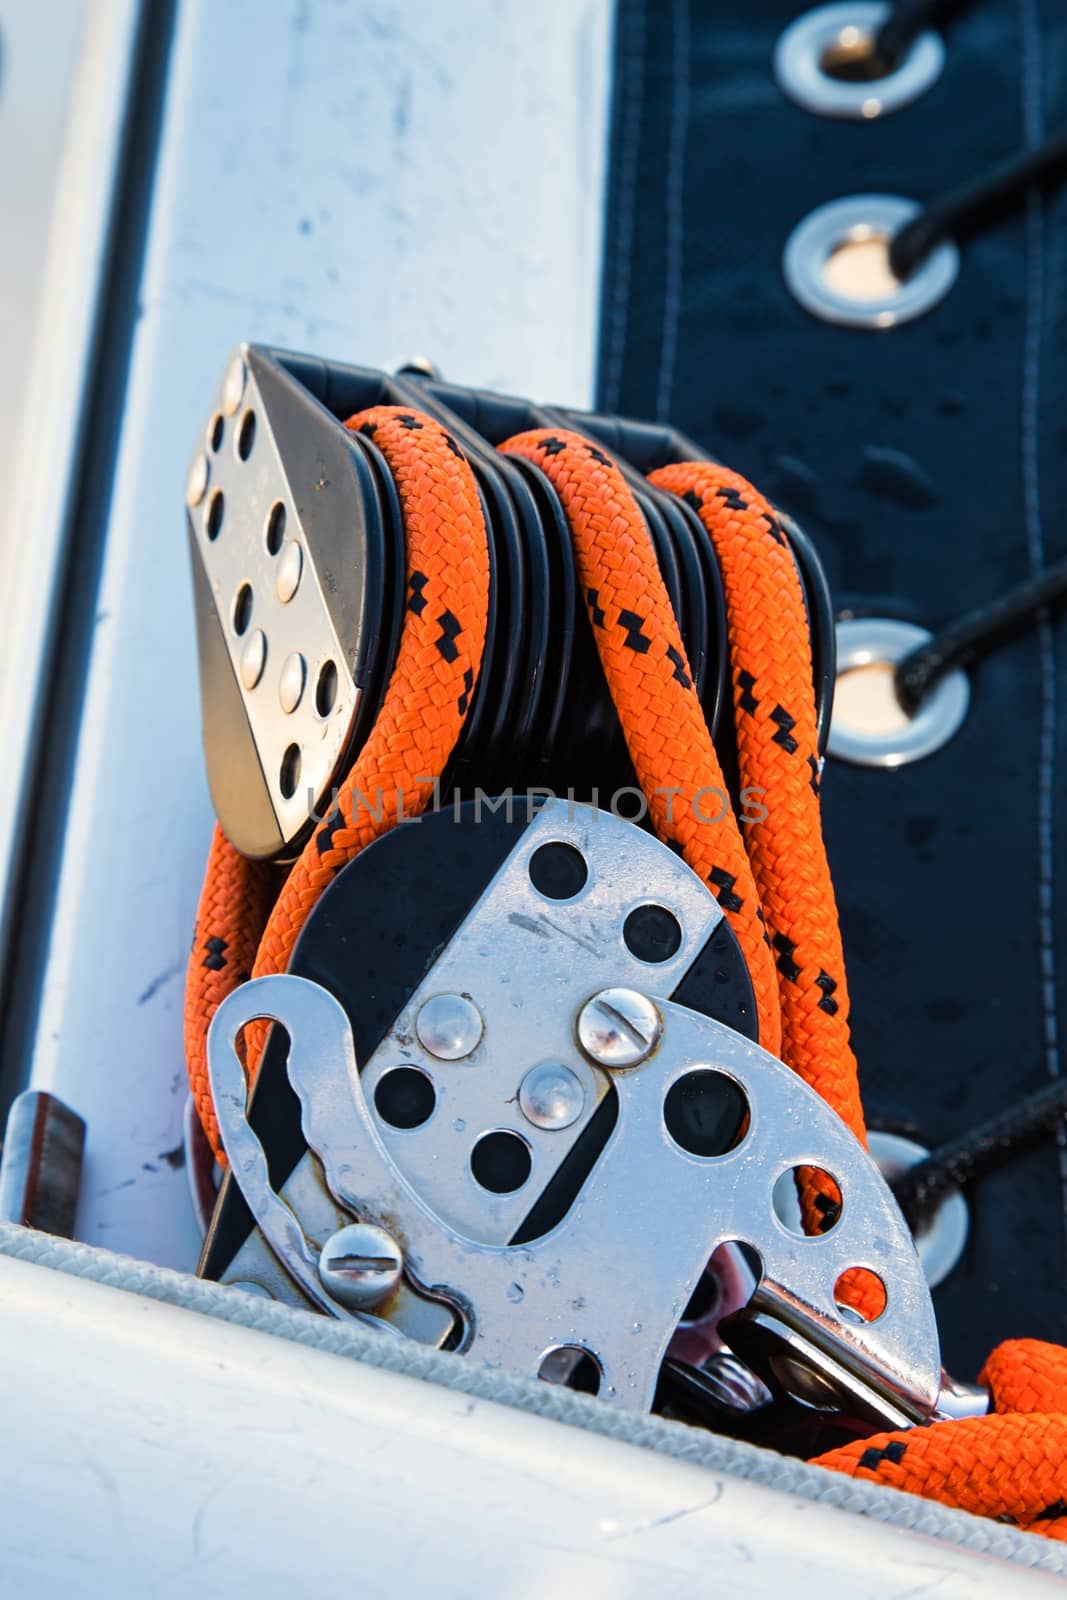 Pulleys with orange roaps and stainless steel buckles on a sailing yacht